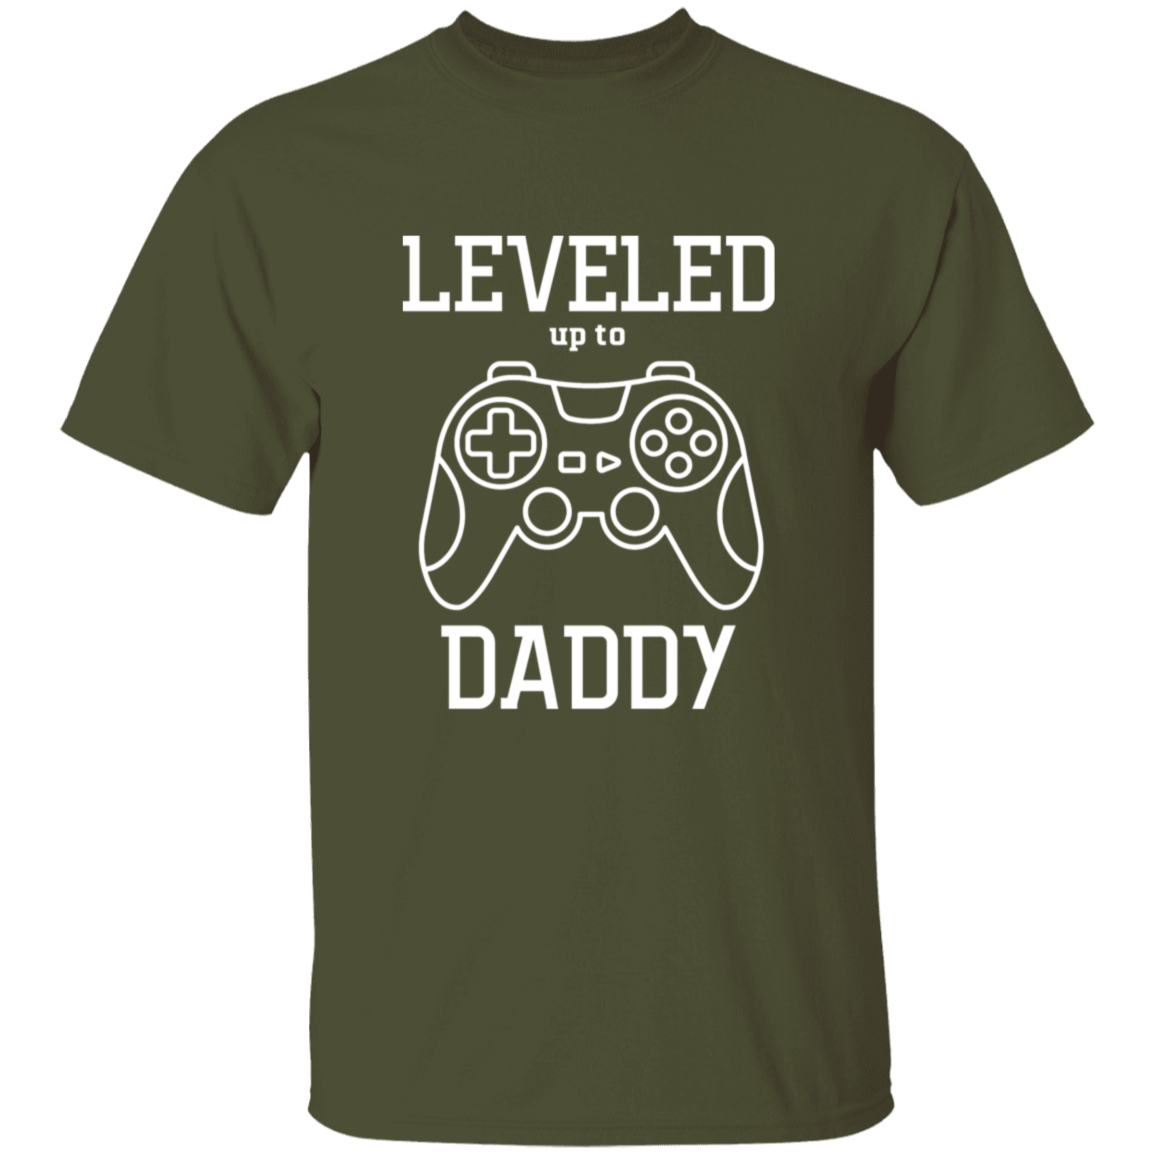 Leveled up DADDY and Baby